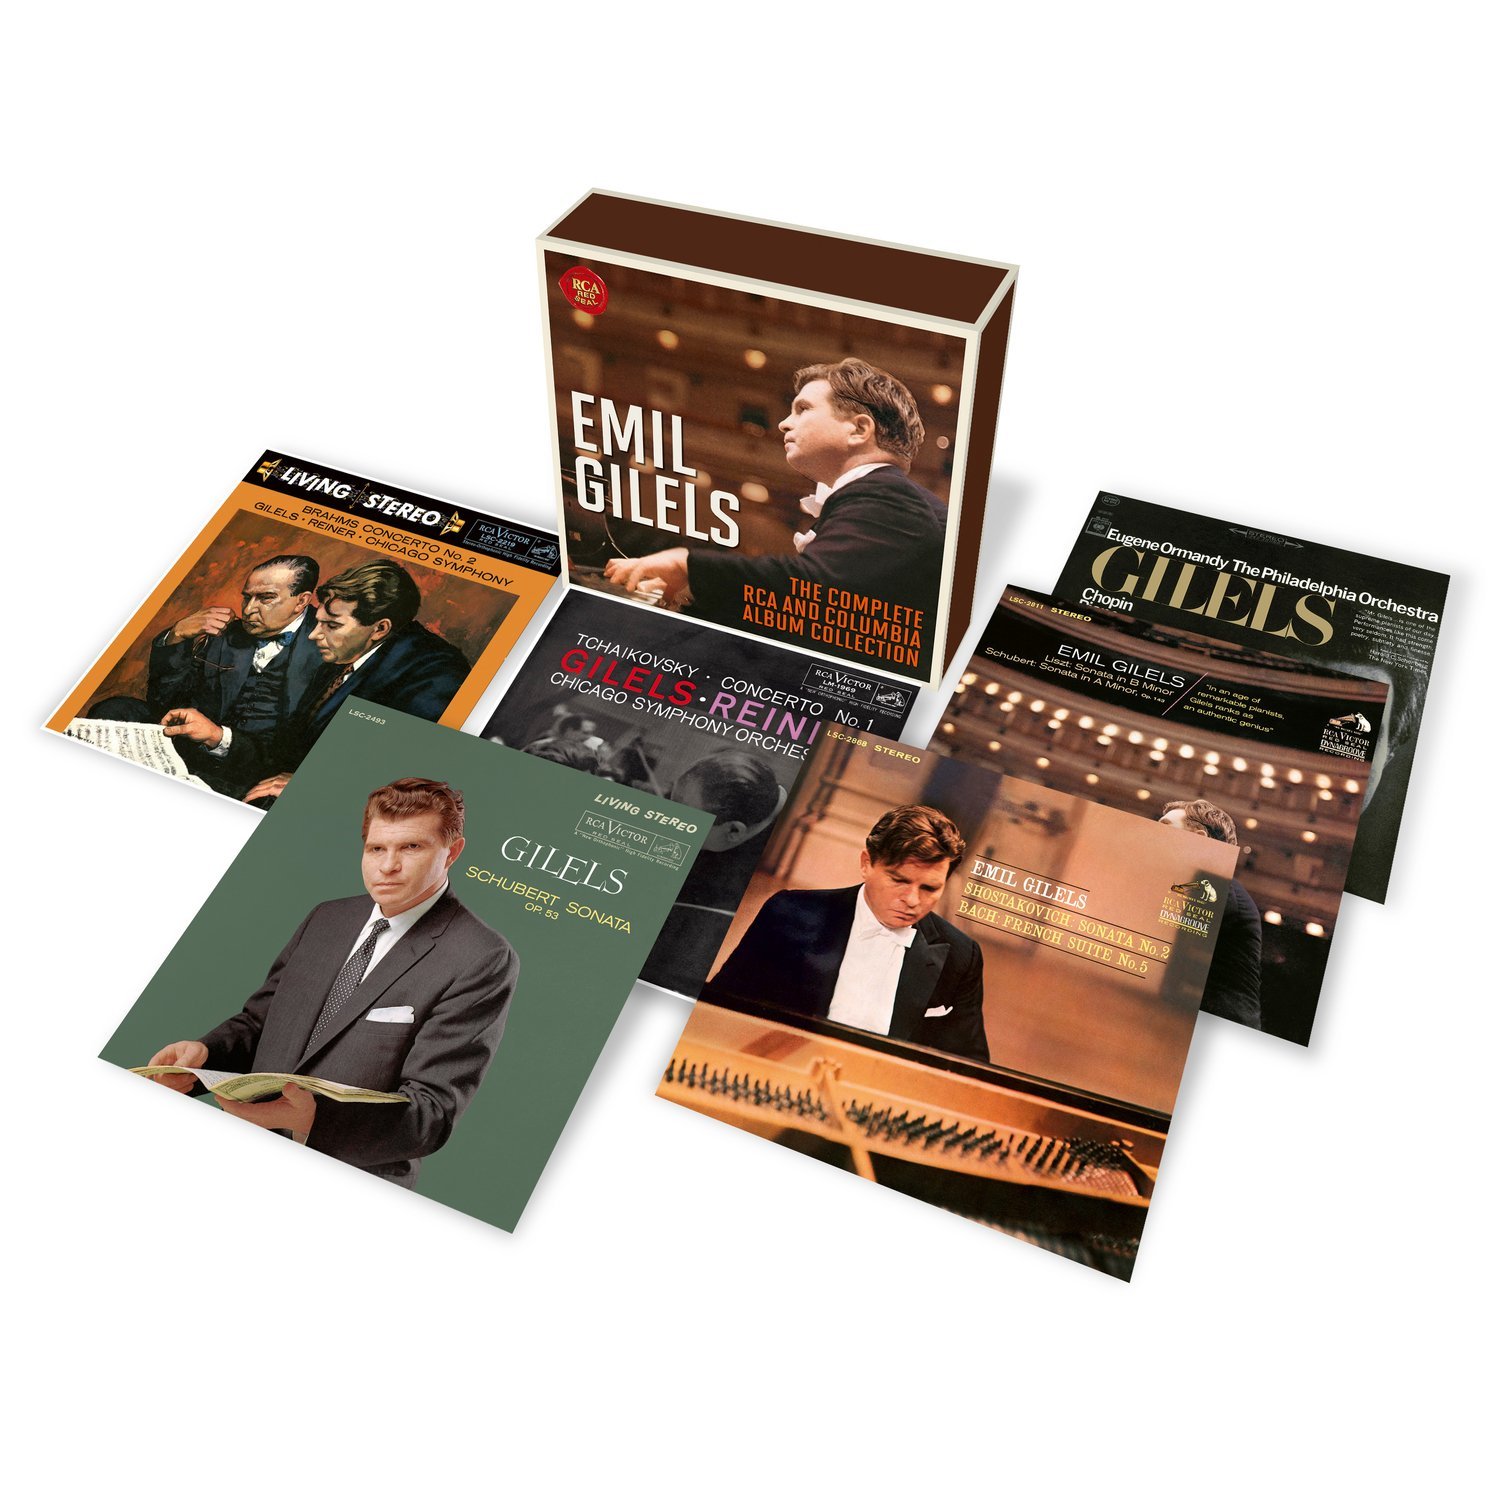 Emil Gilels - The Complete Rca And Columbia Album Collection